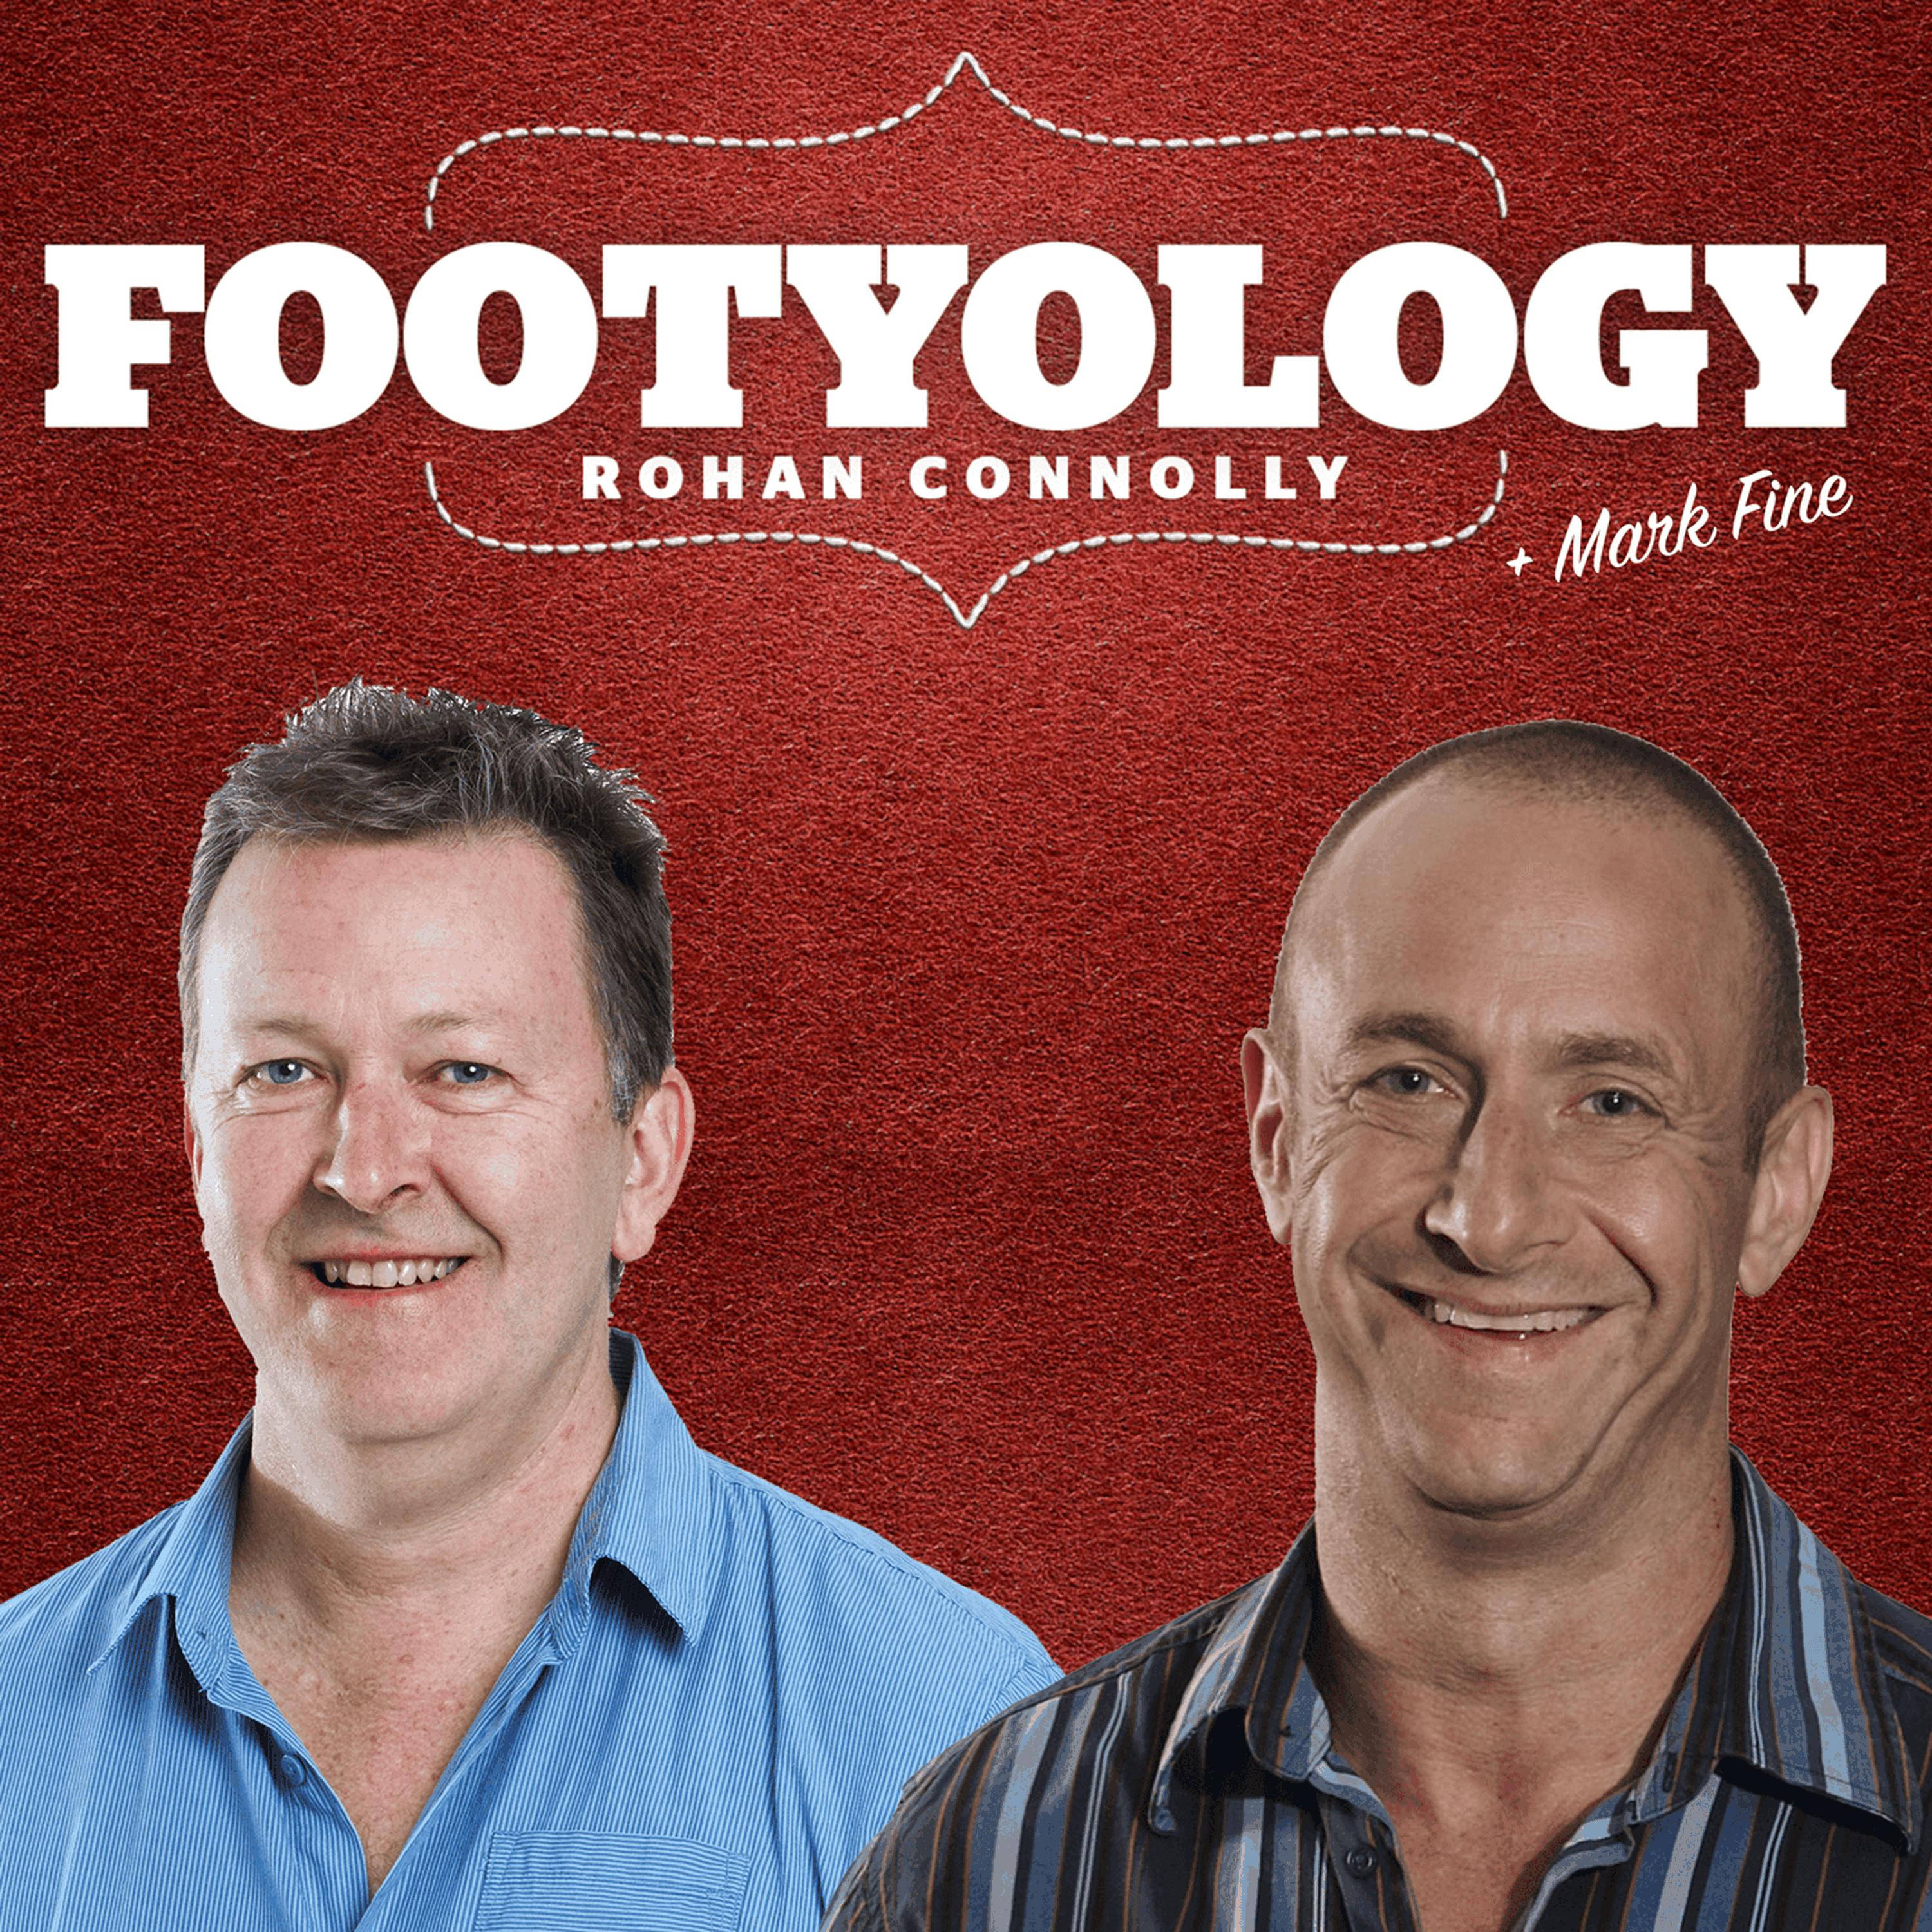 Footyology TV - Round 15: Footy's back at it's best!